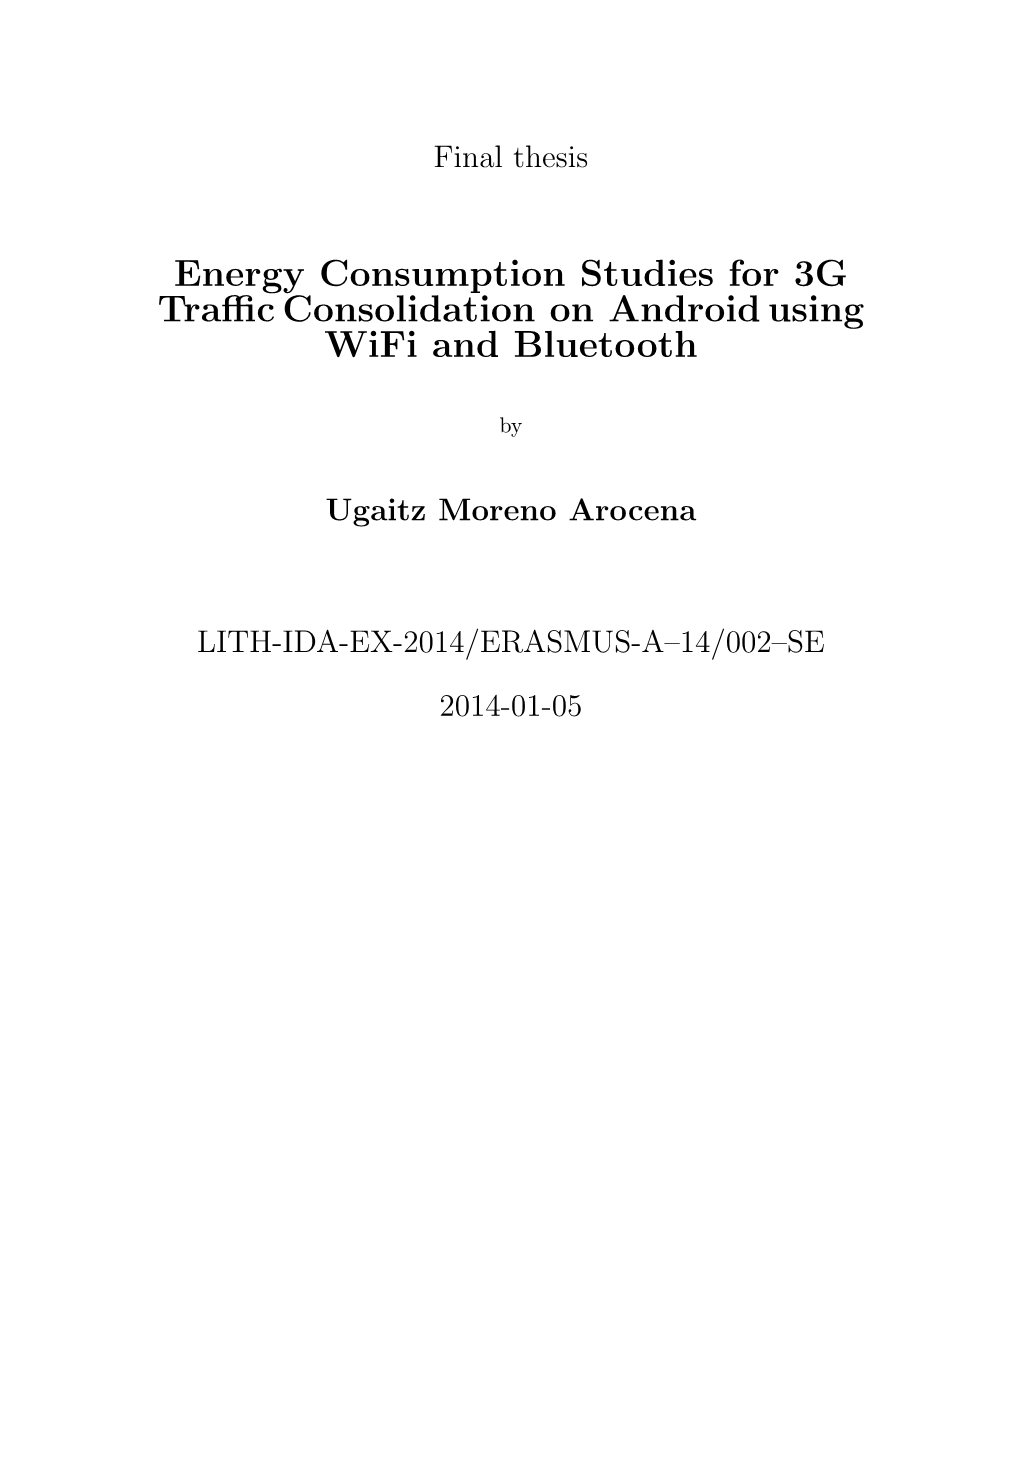 Energy Consumption Studies for 3G Traffic Consolidation on Android